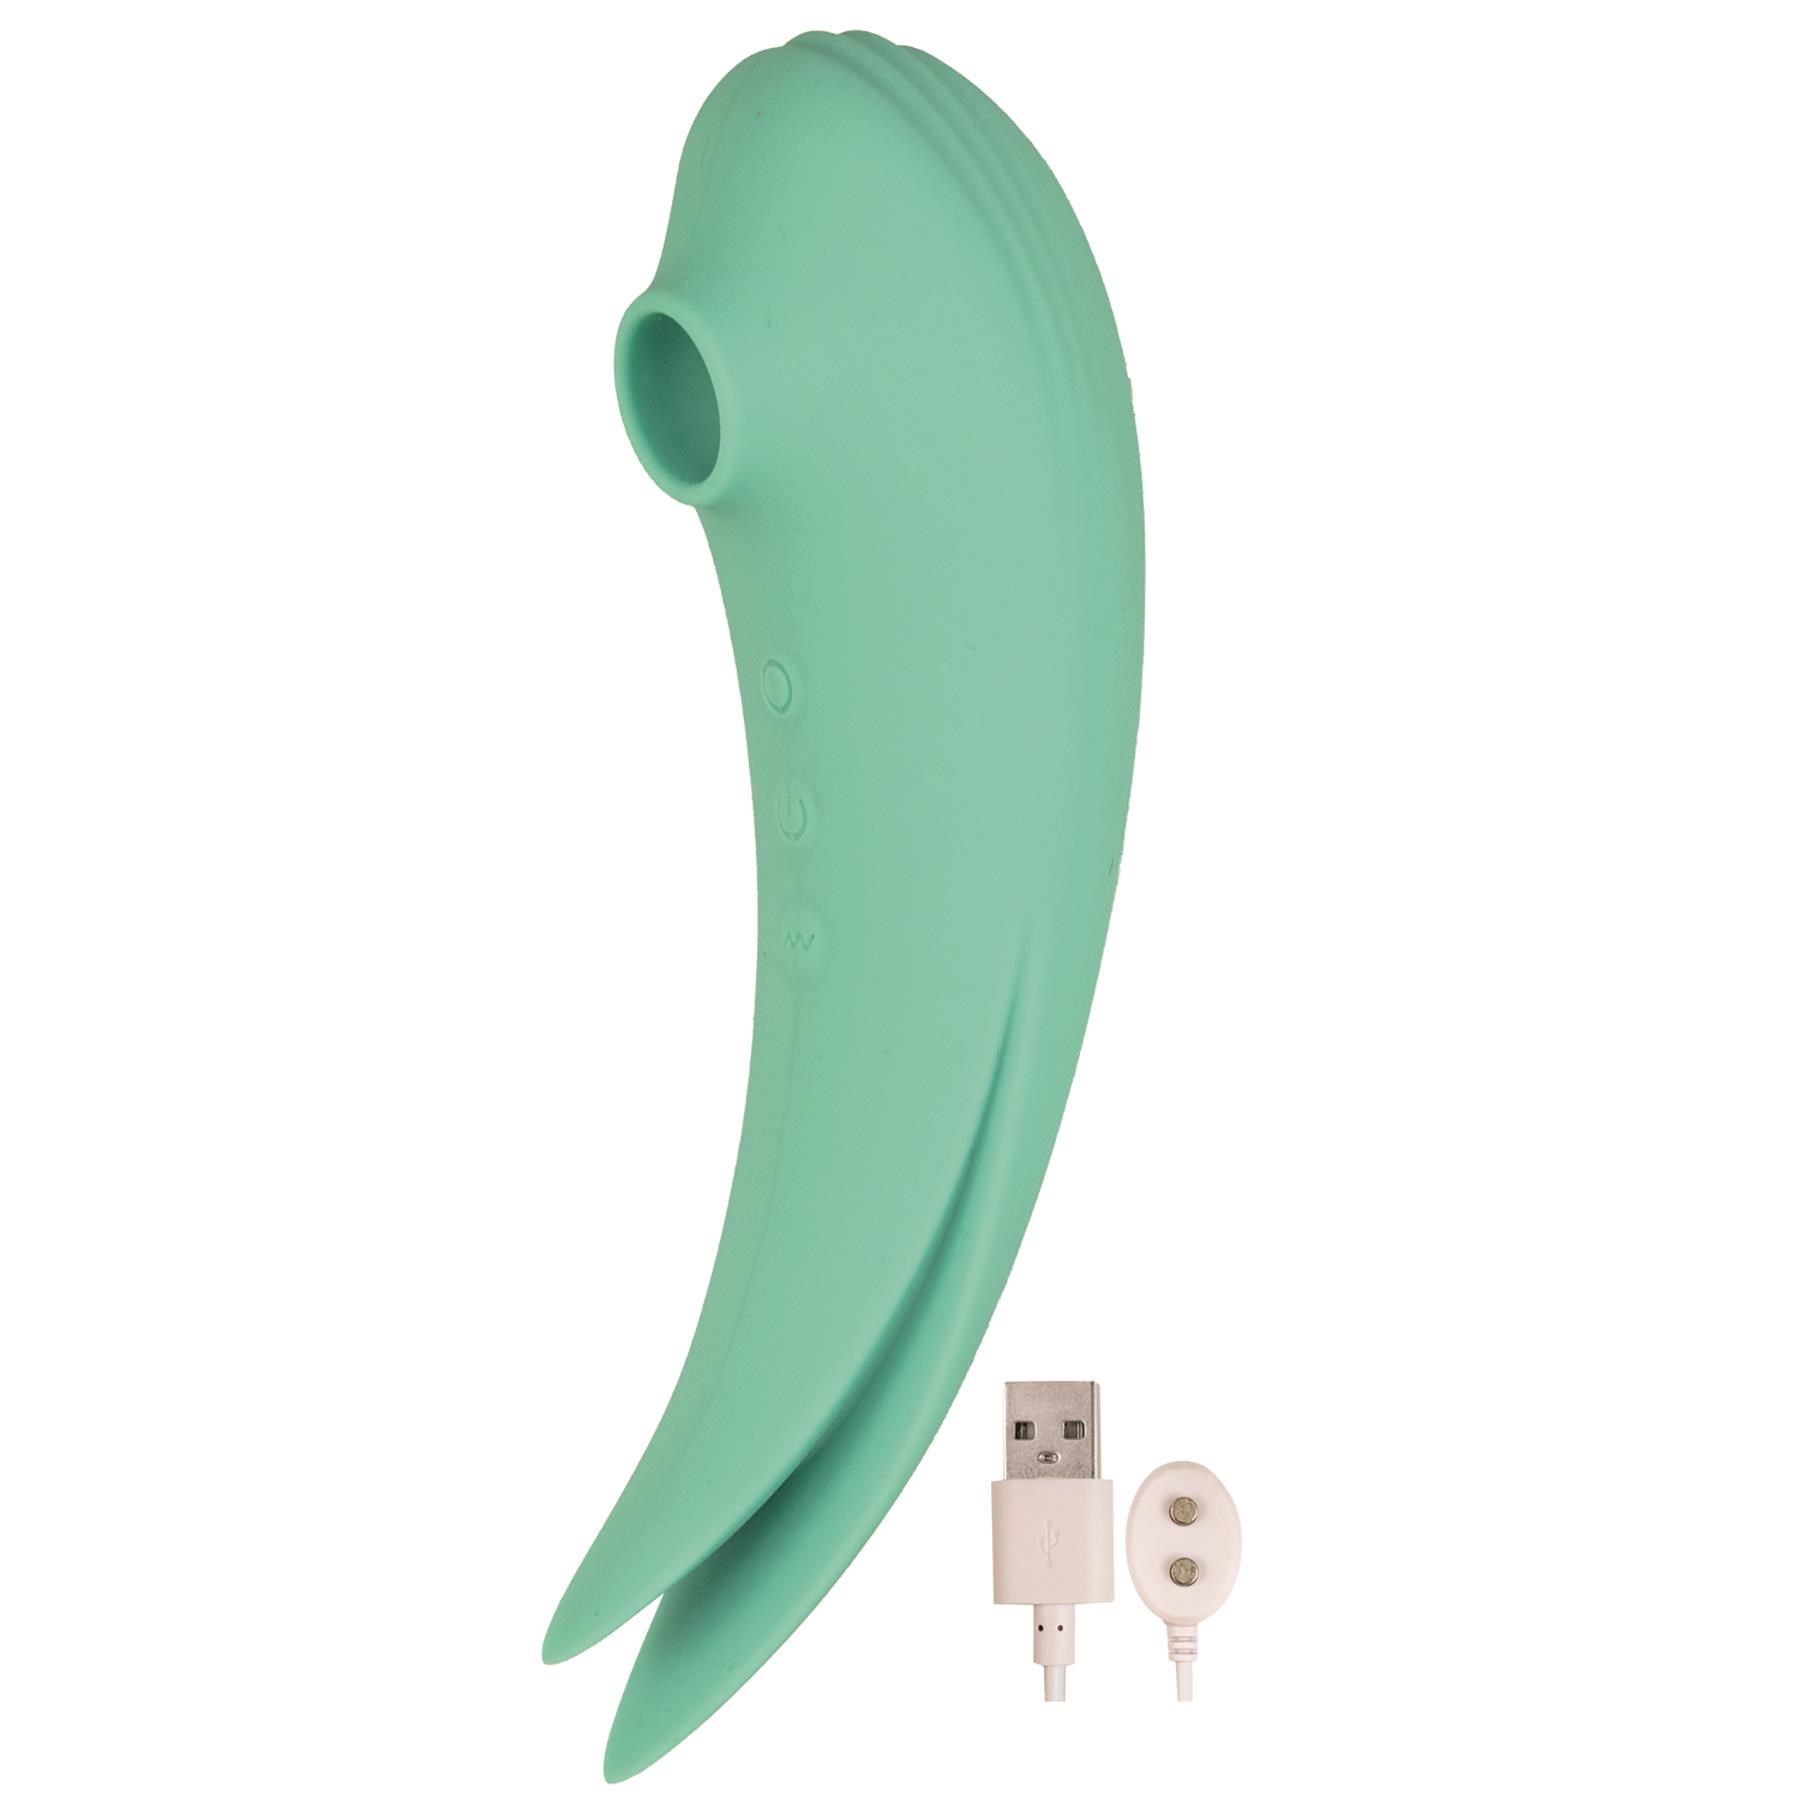 Mystique Suction Vibrator - Product Shot With Charging Cable